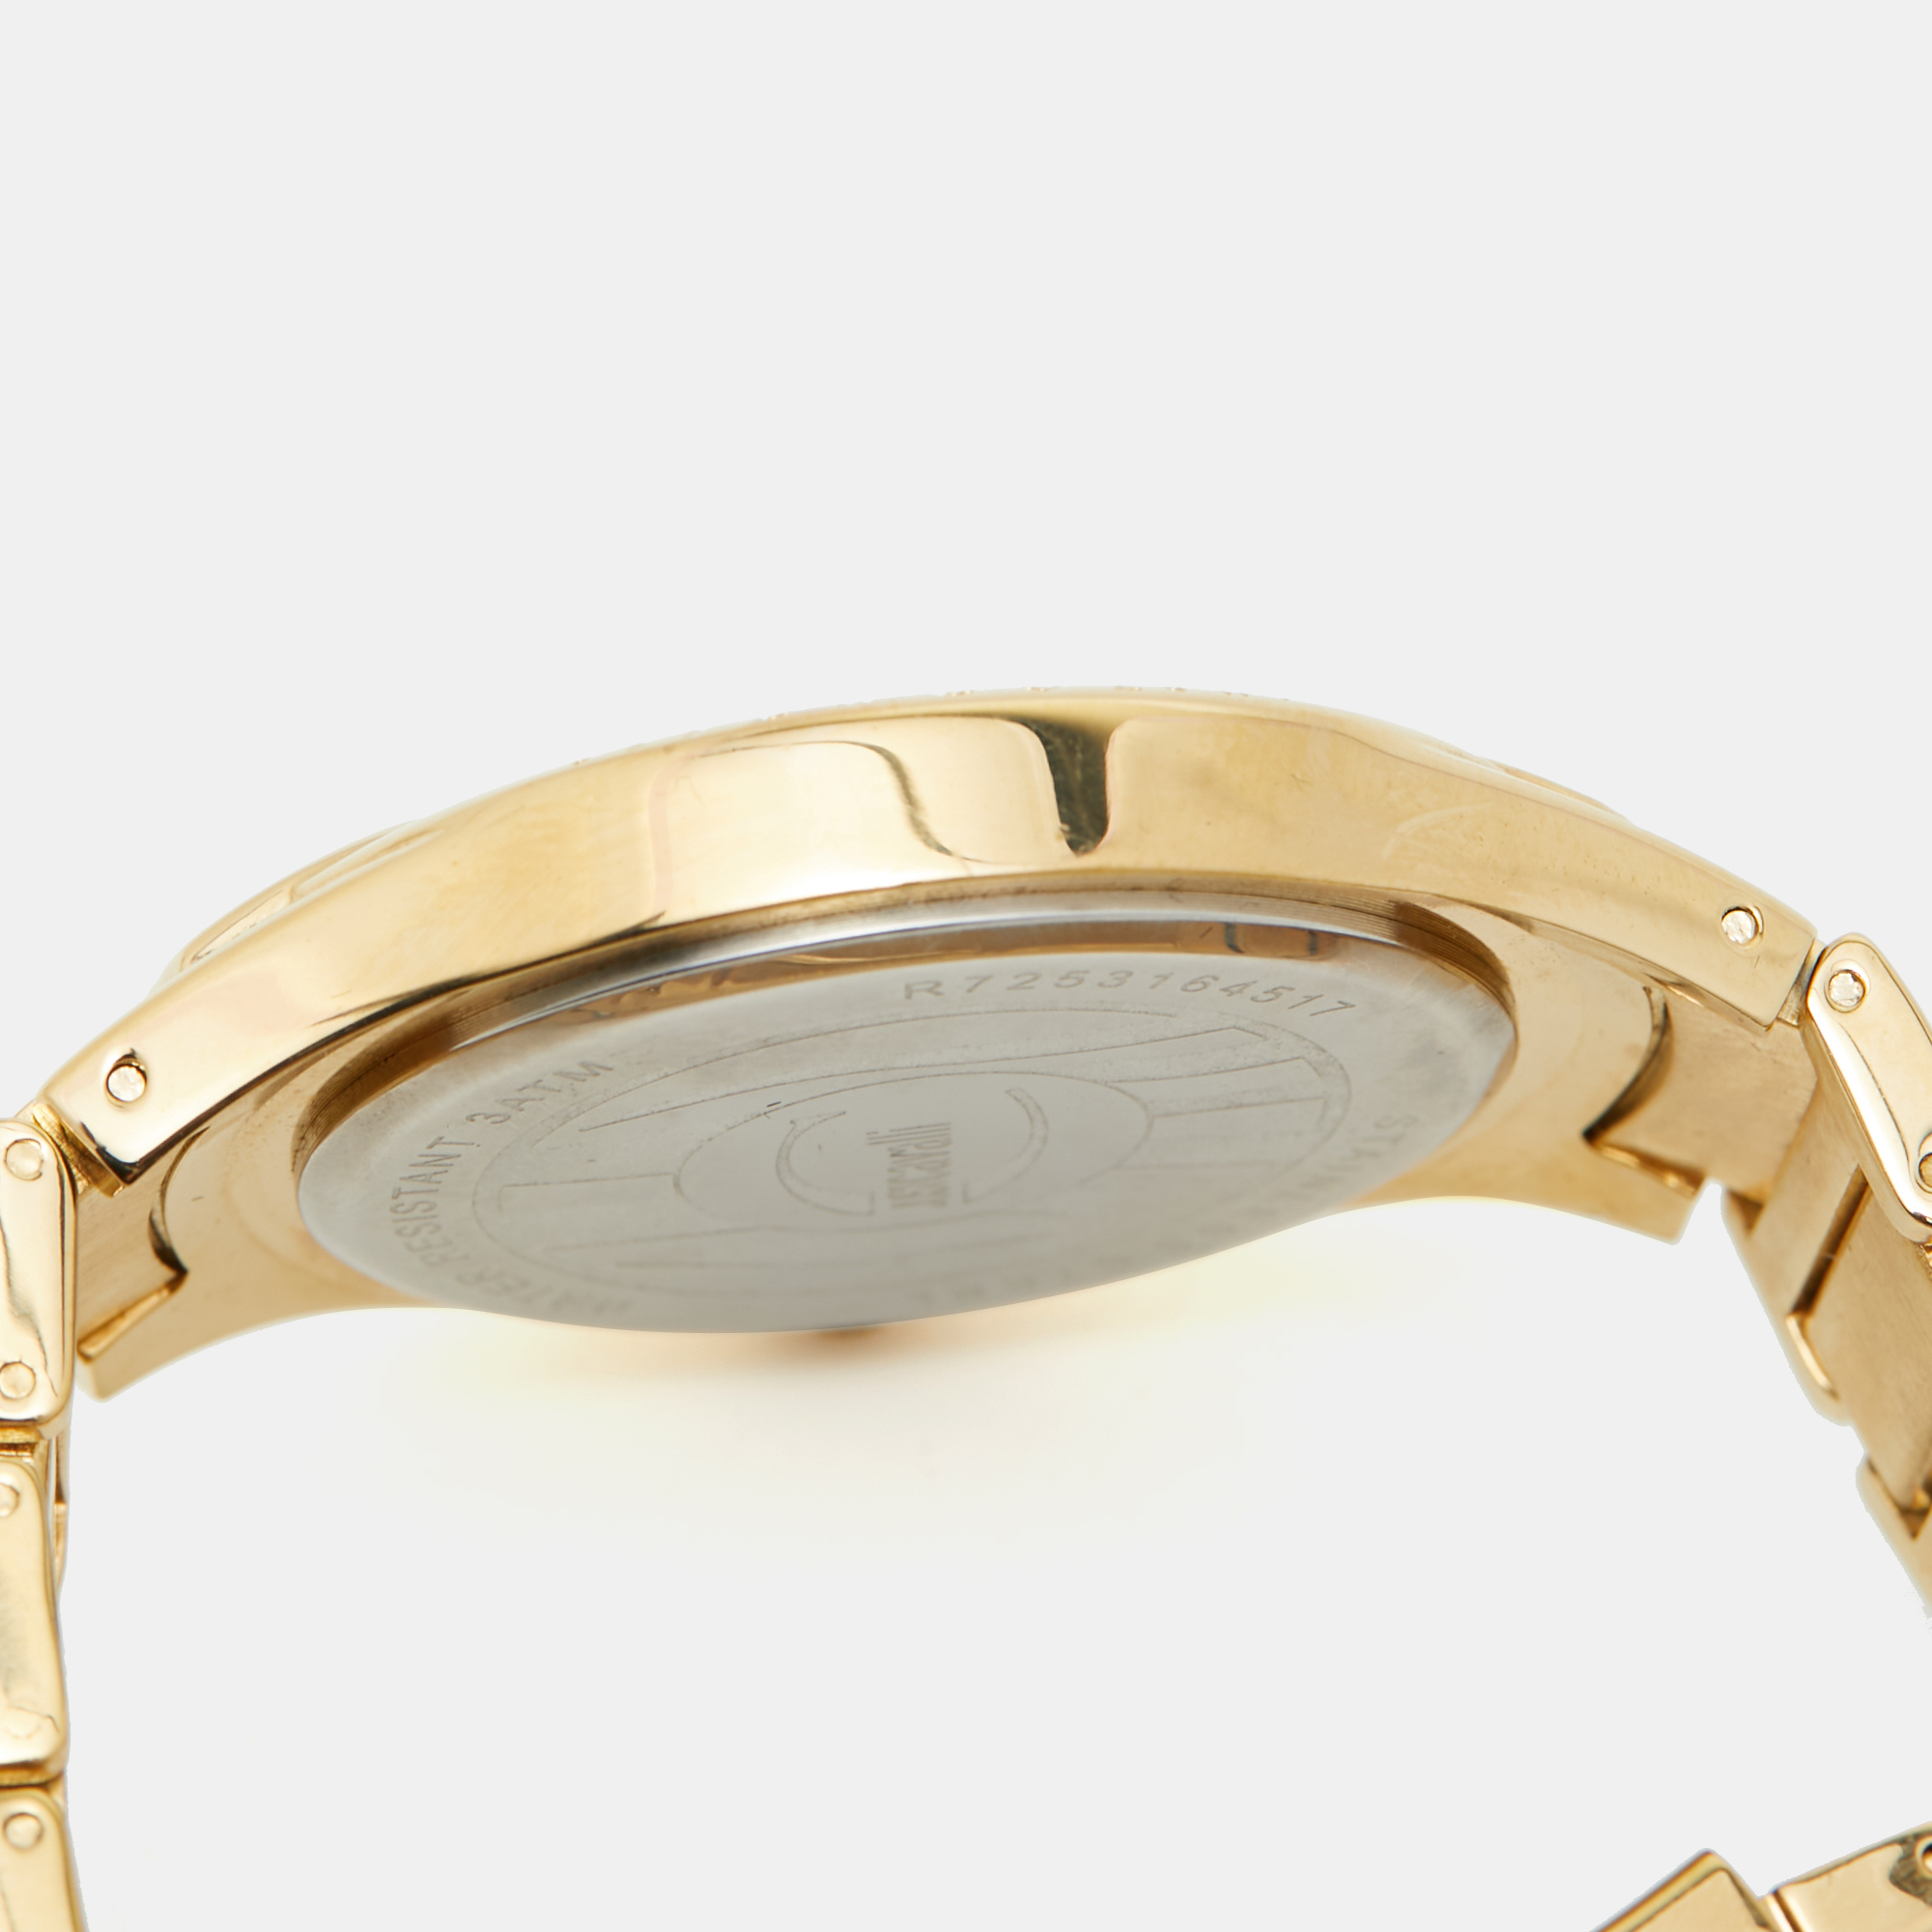 Just Cavalli Champagne Yellow Gold Plated Stainless Steel Instinct R7253164517 Women's Wristwatch 38 Mm